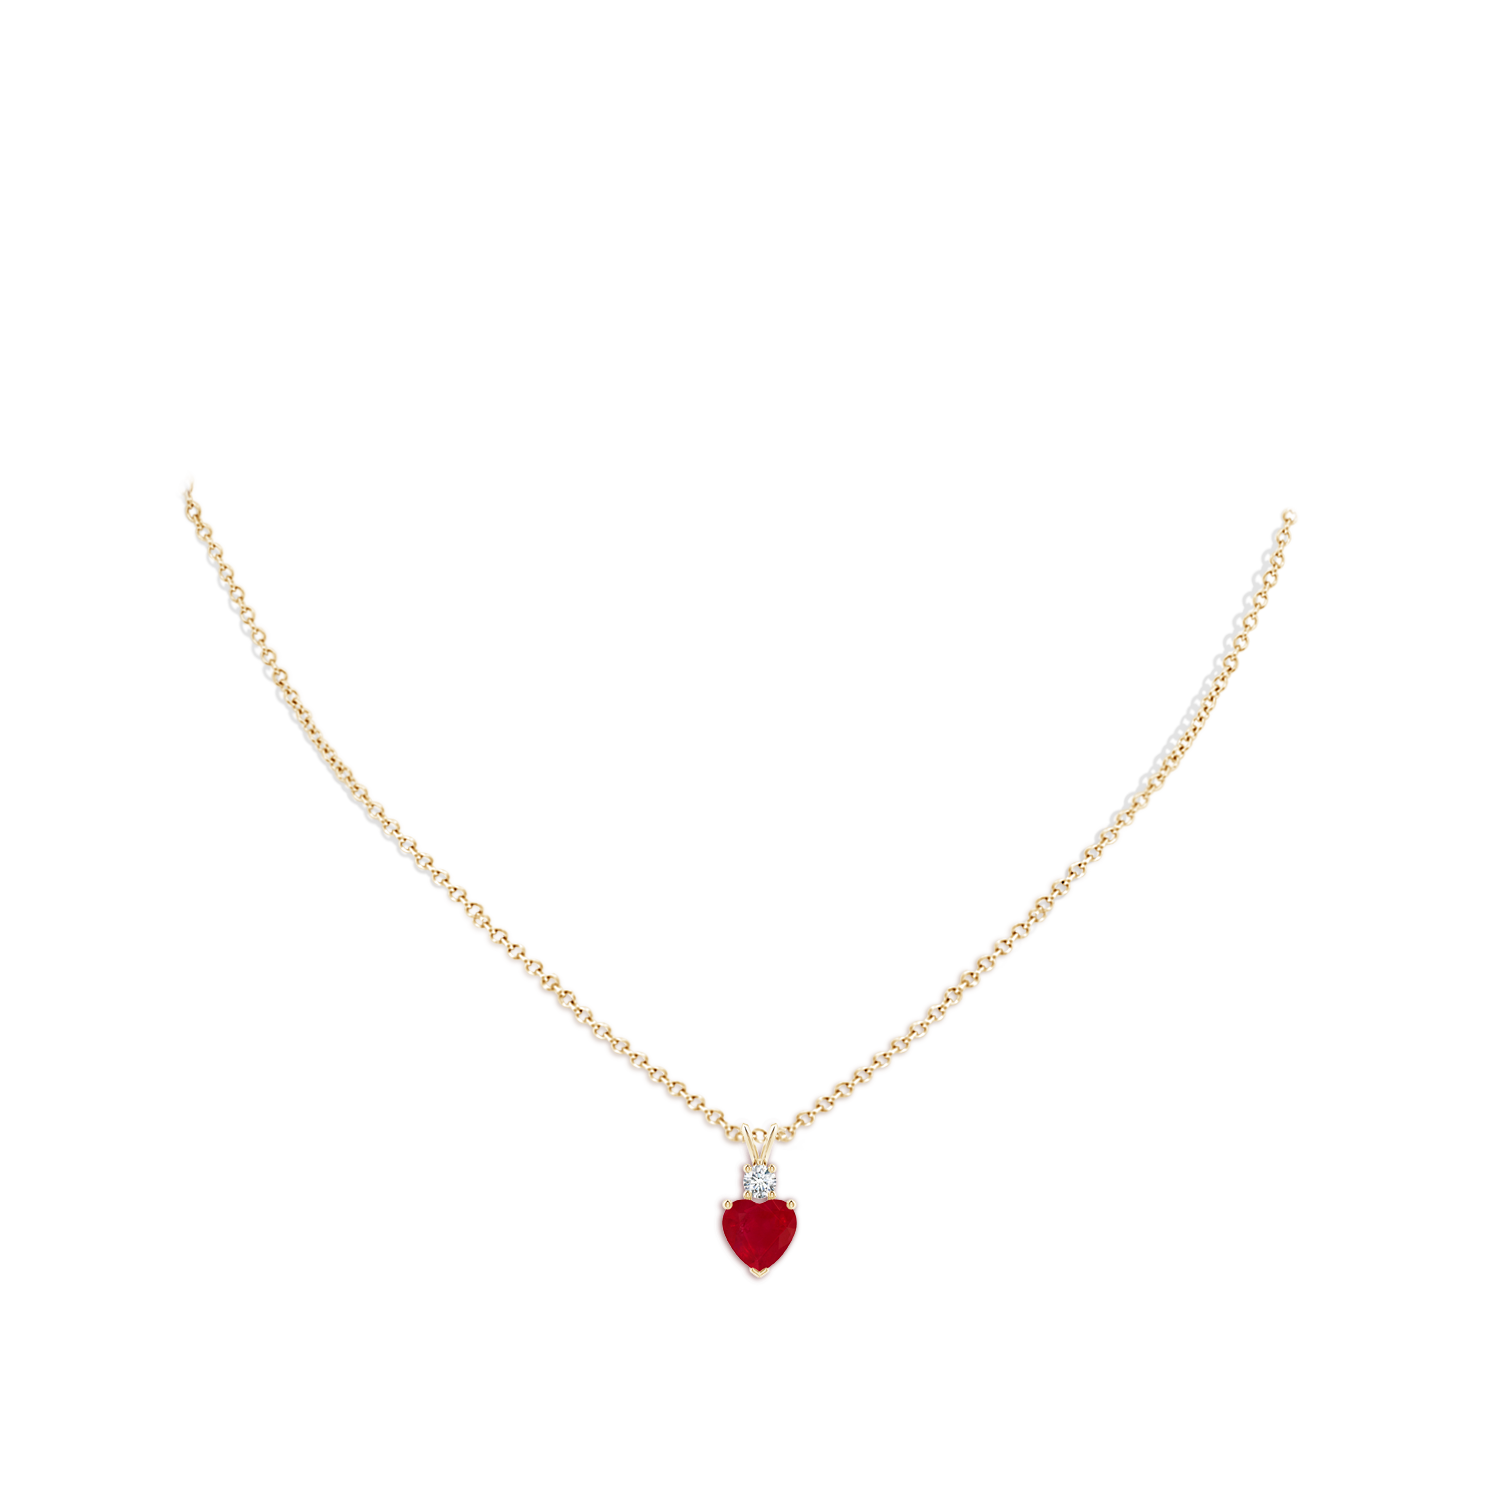 AA - Ruby / 1.8 CT / 14 KT Yellow Gold